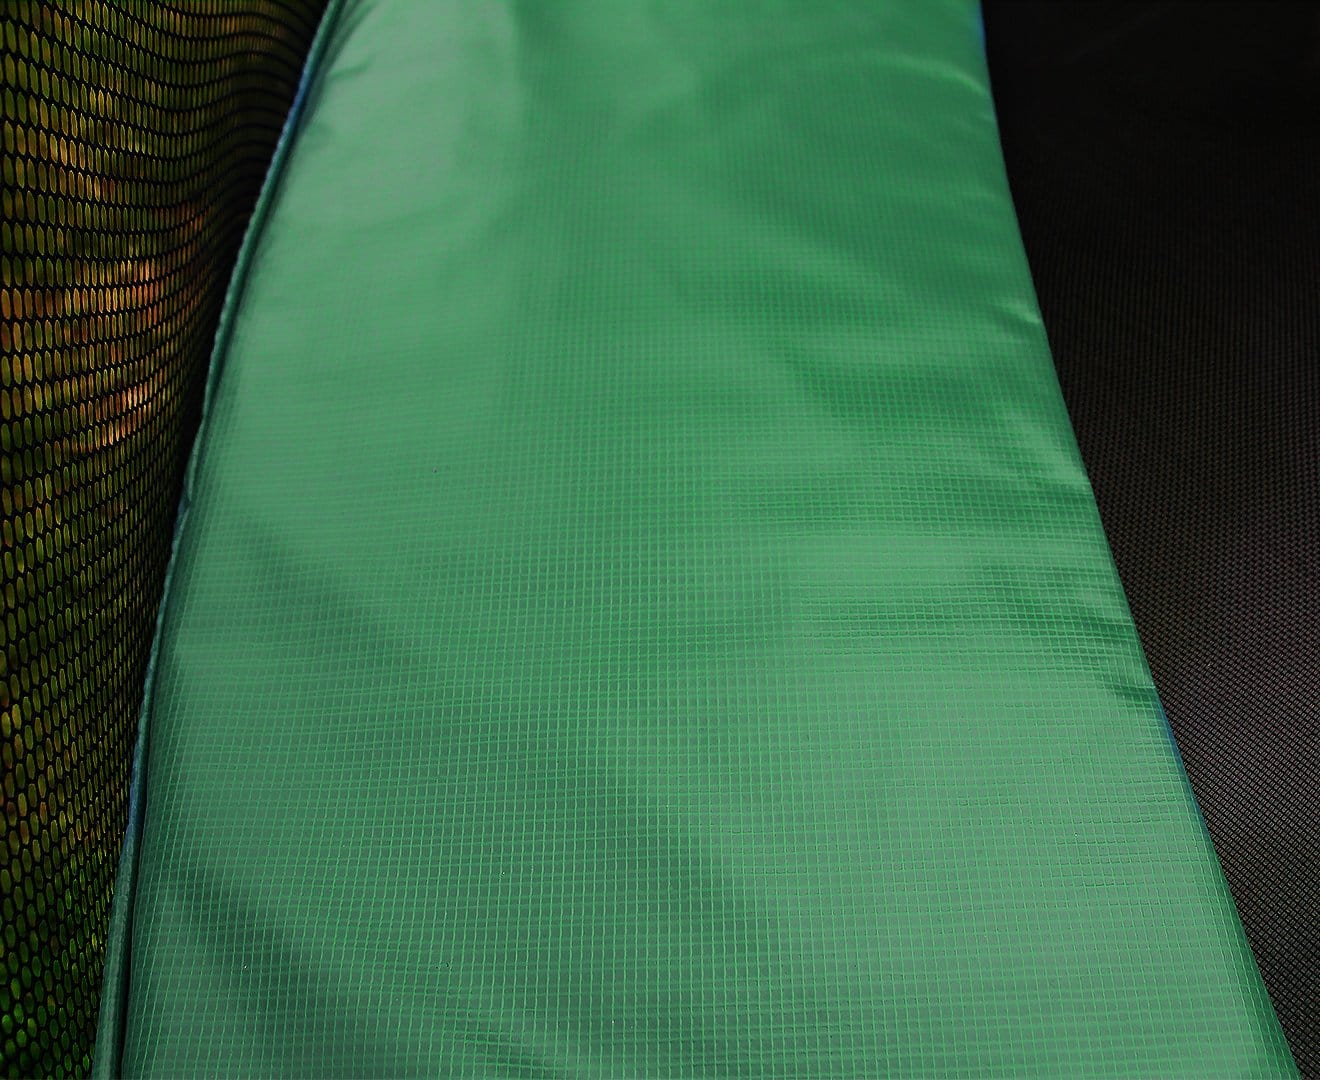 08Ft Trampoline Replacement Safety Pad And Net Round 6 Poles Green